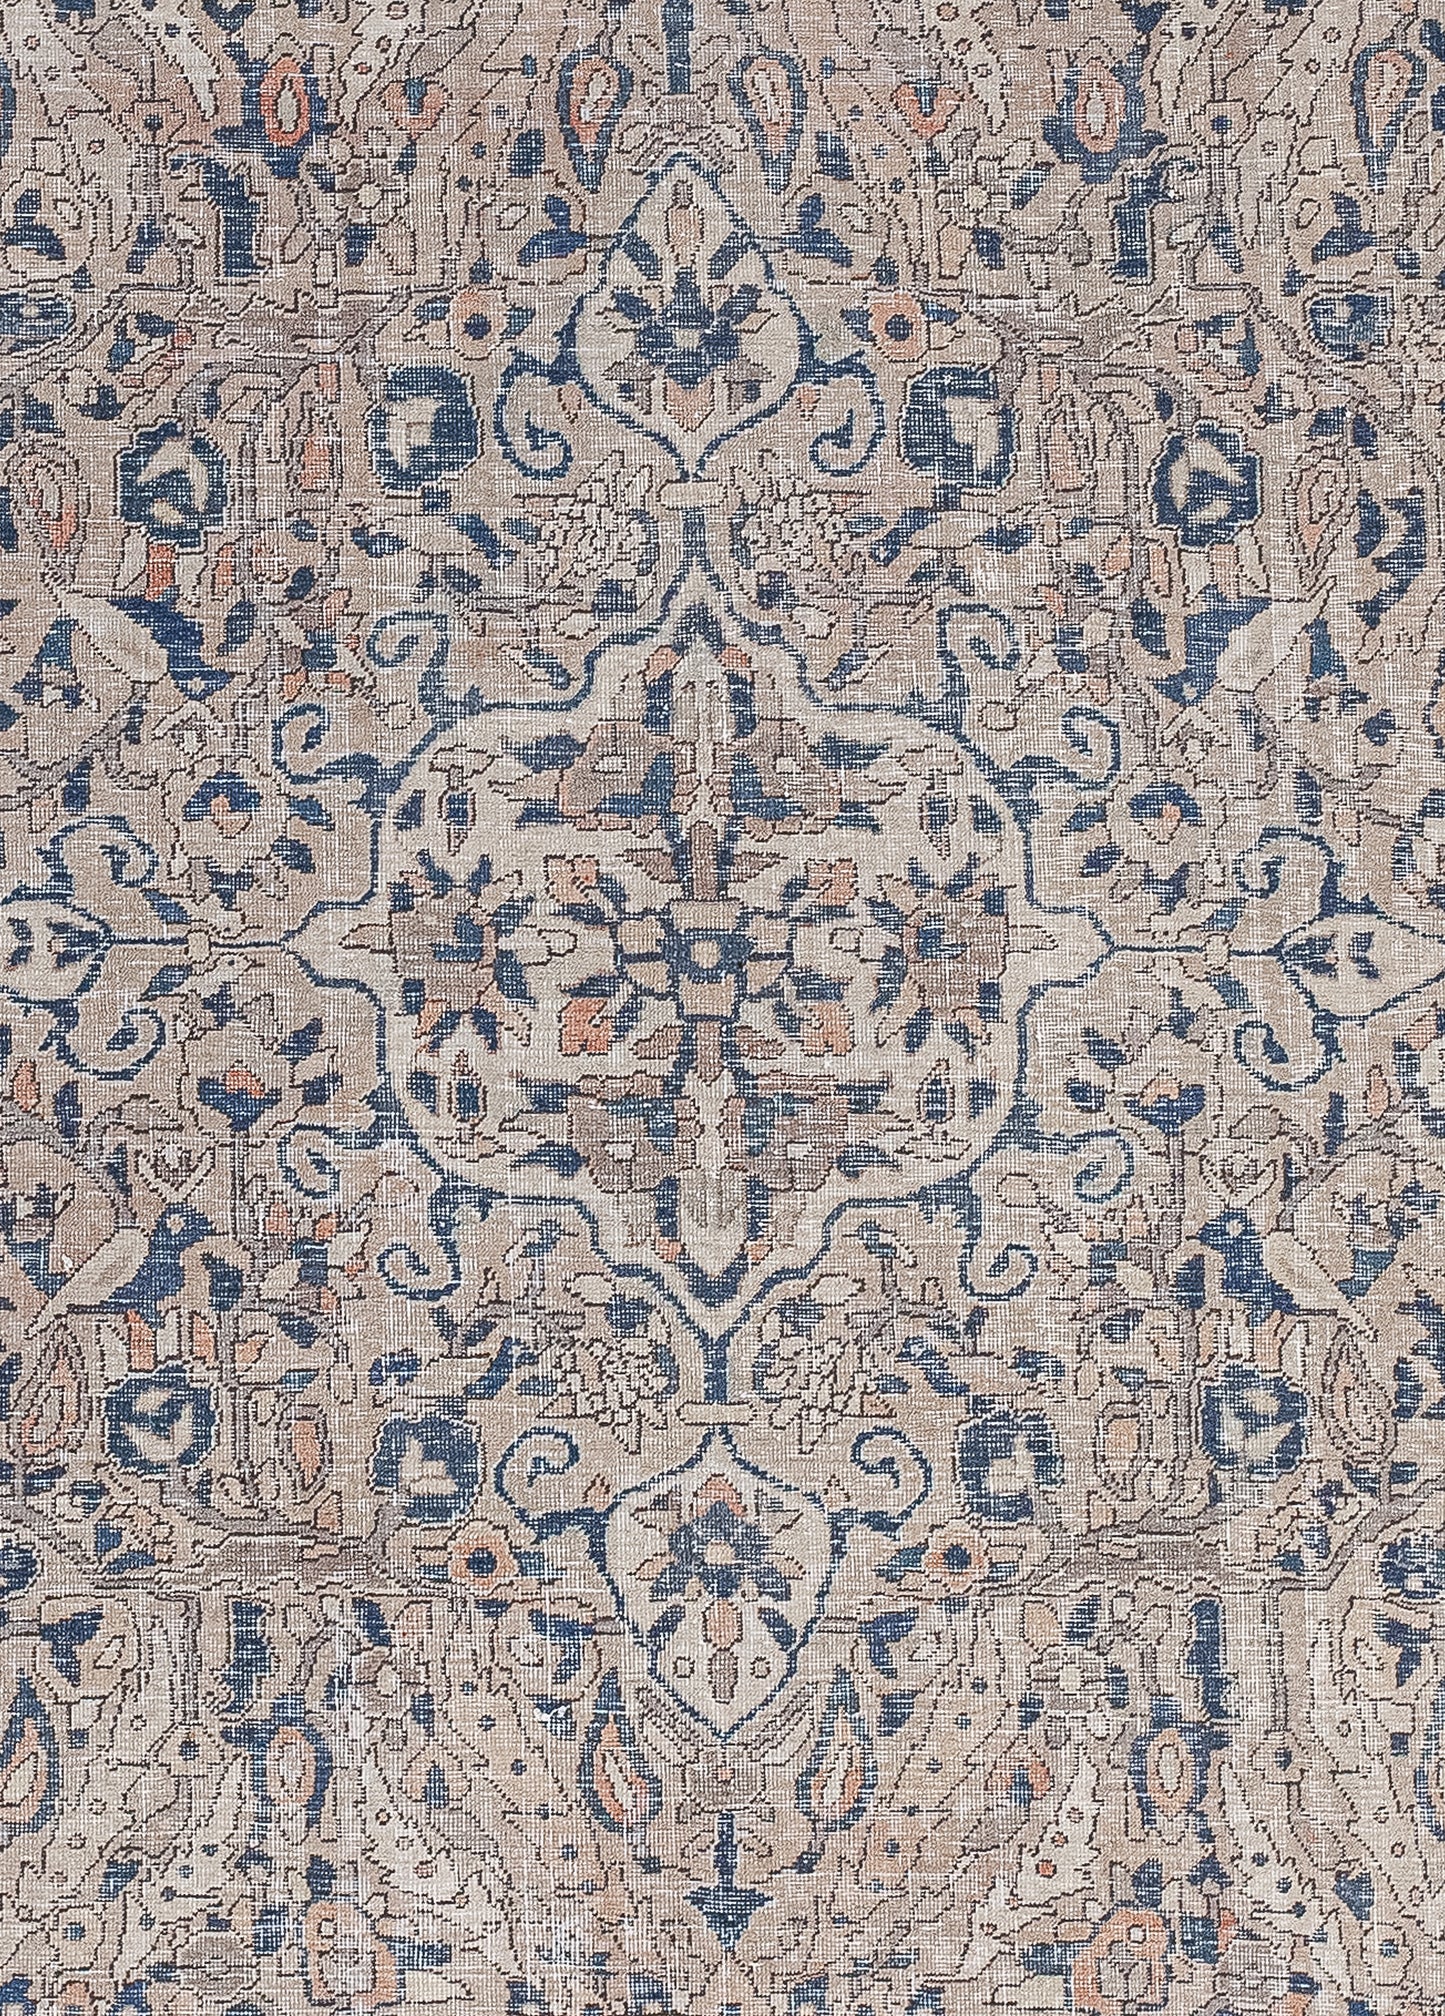 The center of the rug features a large outlined ornament, with abstract roses and their petals inside.